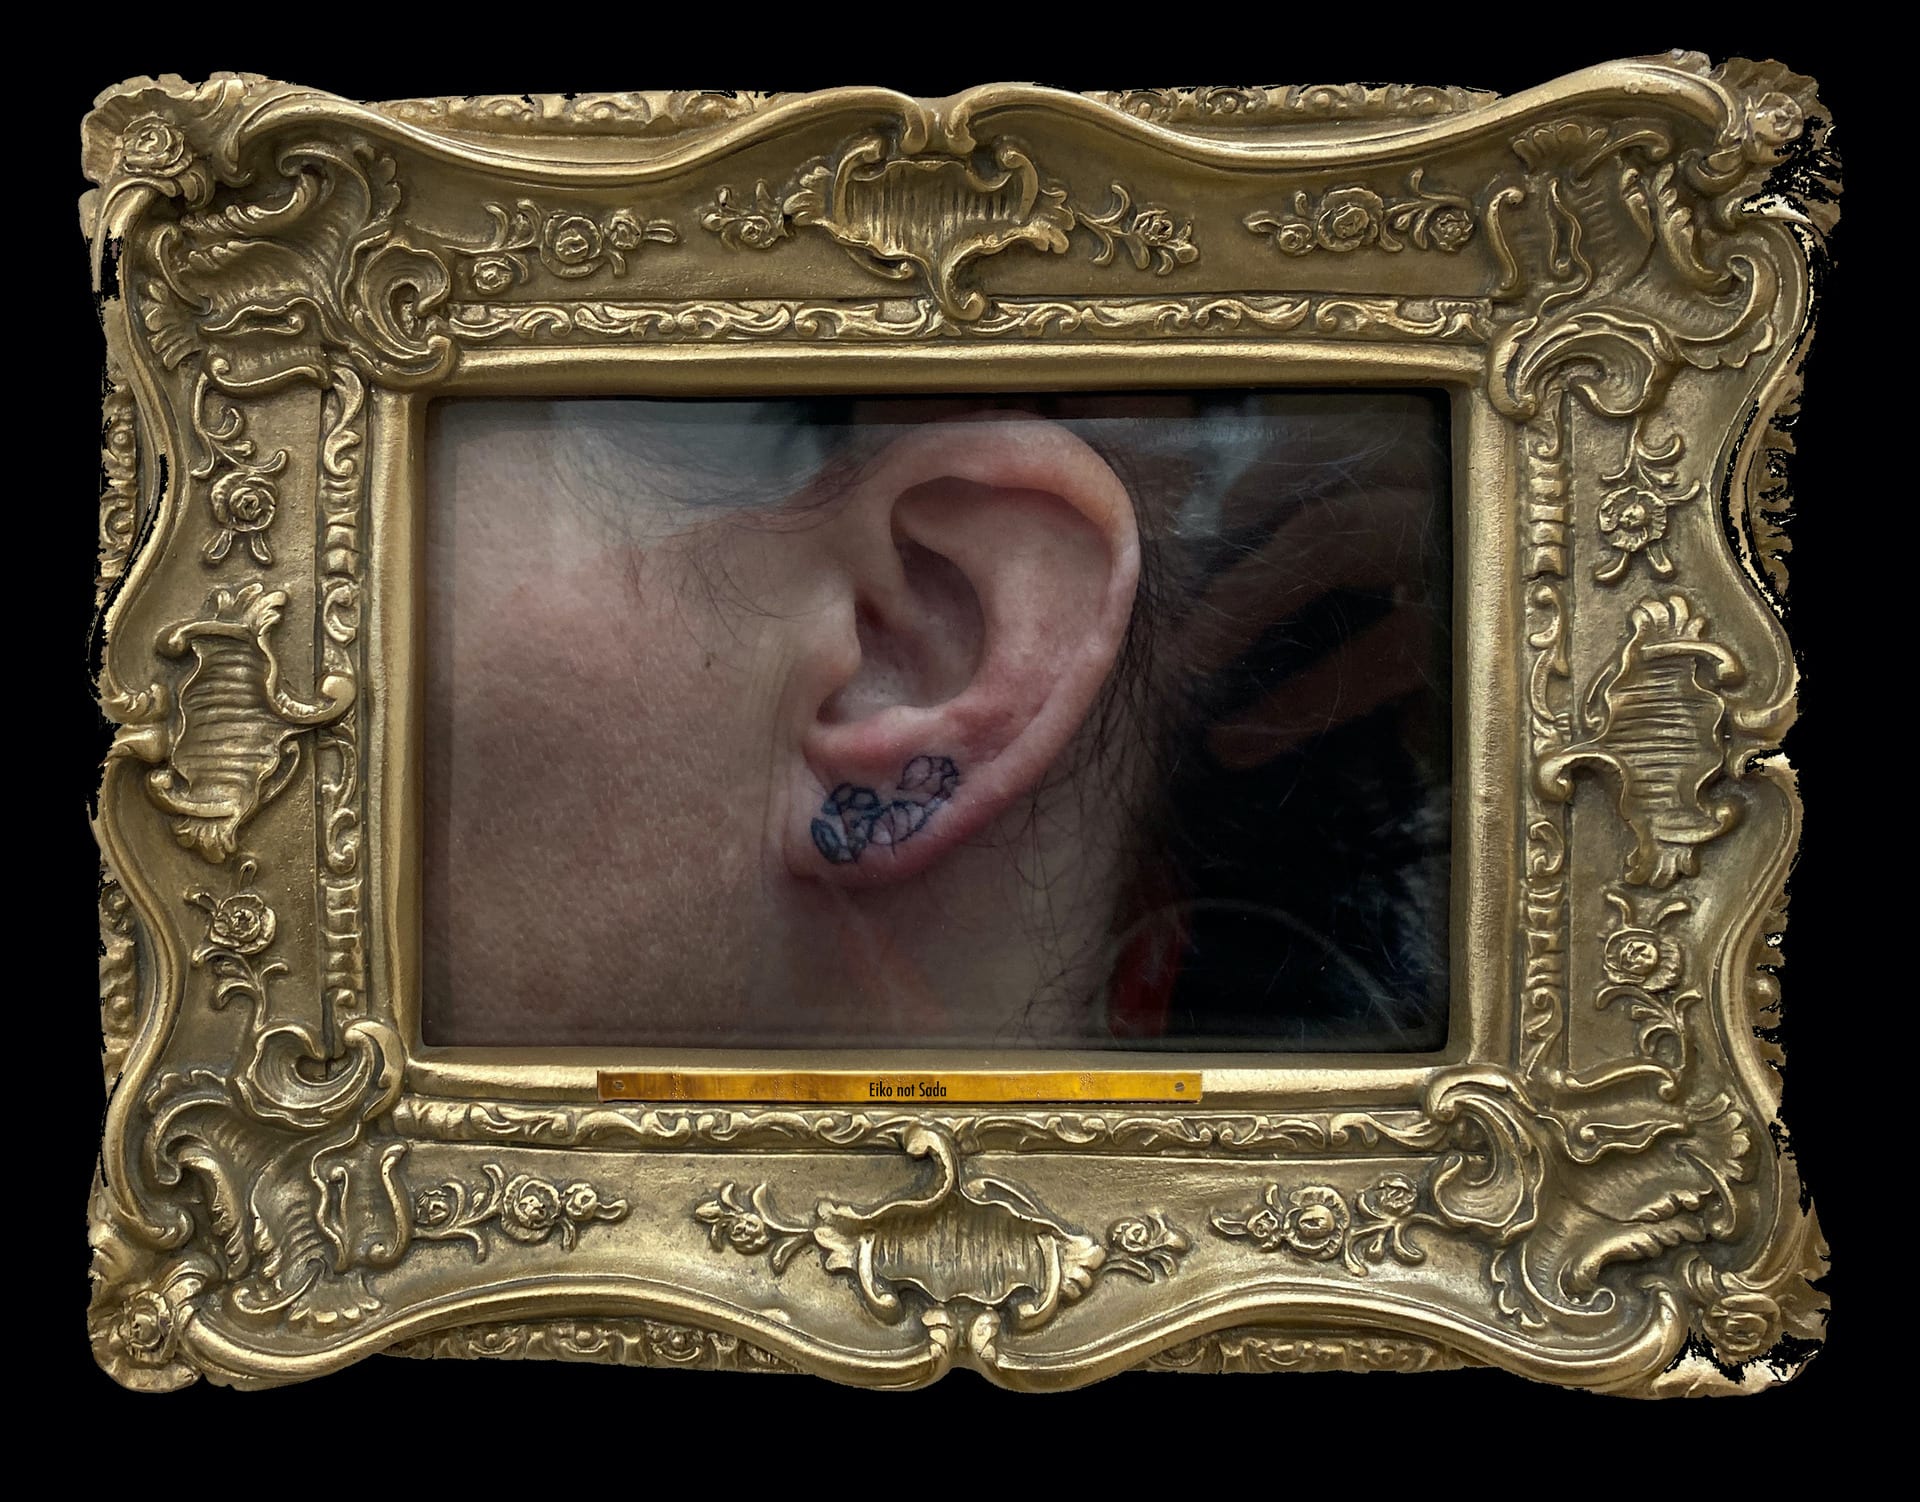 Photographic image of artists left ear with scorpion tattoo in a gold baroque frame with nameplate reading "Eiko not Sada"